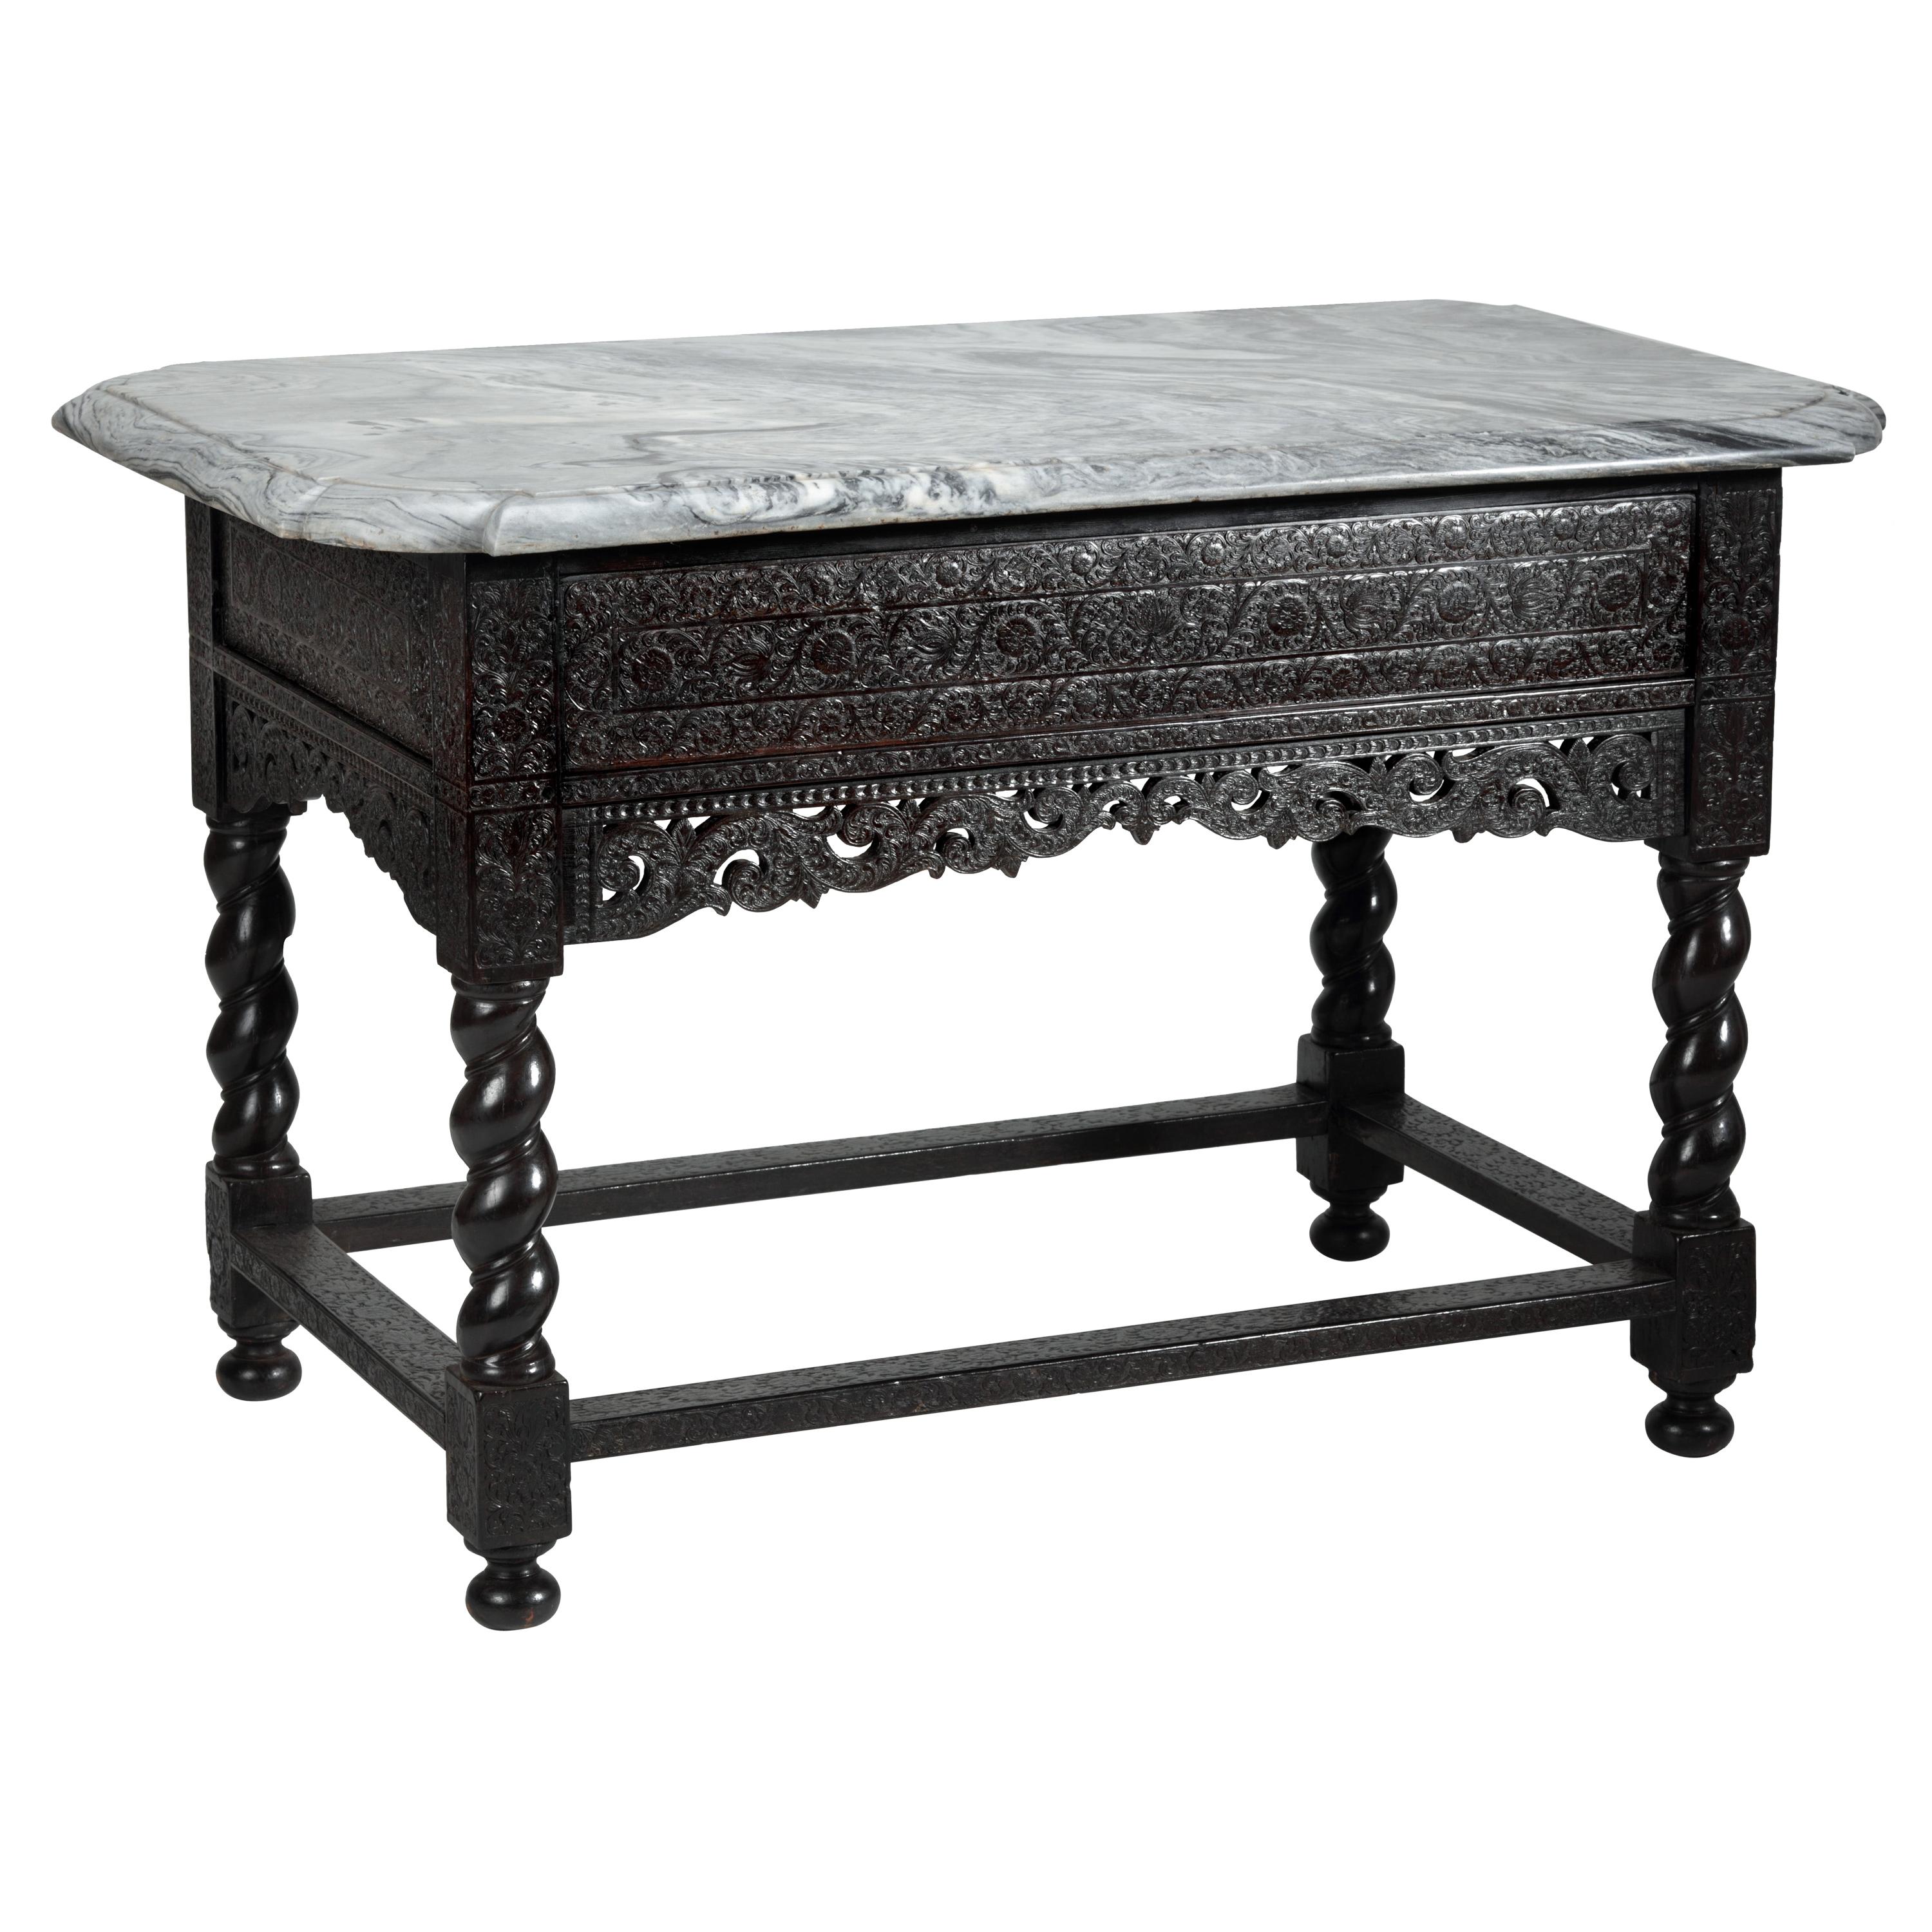 Dutch Colonial 17th Century Ebony Center Table with Marble Top For Sale